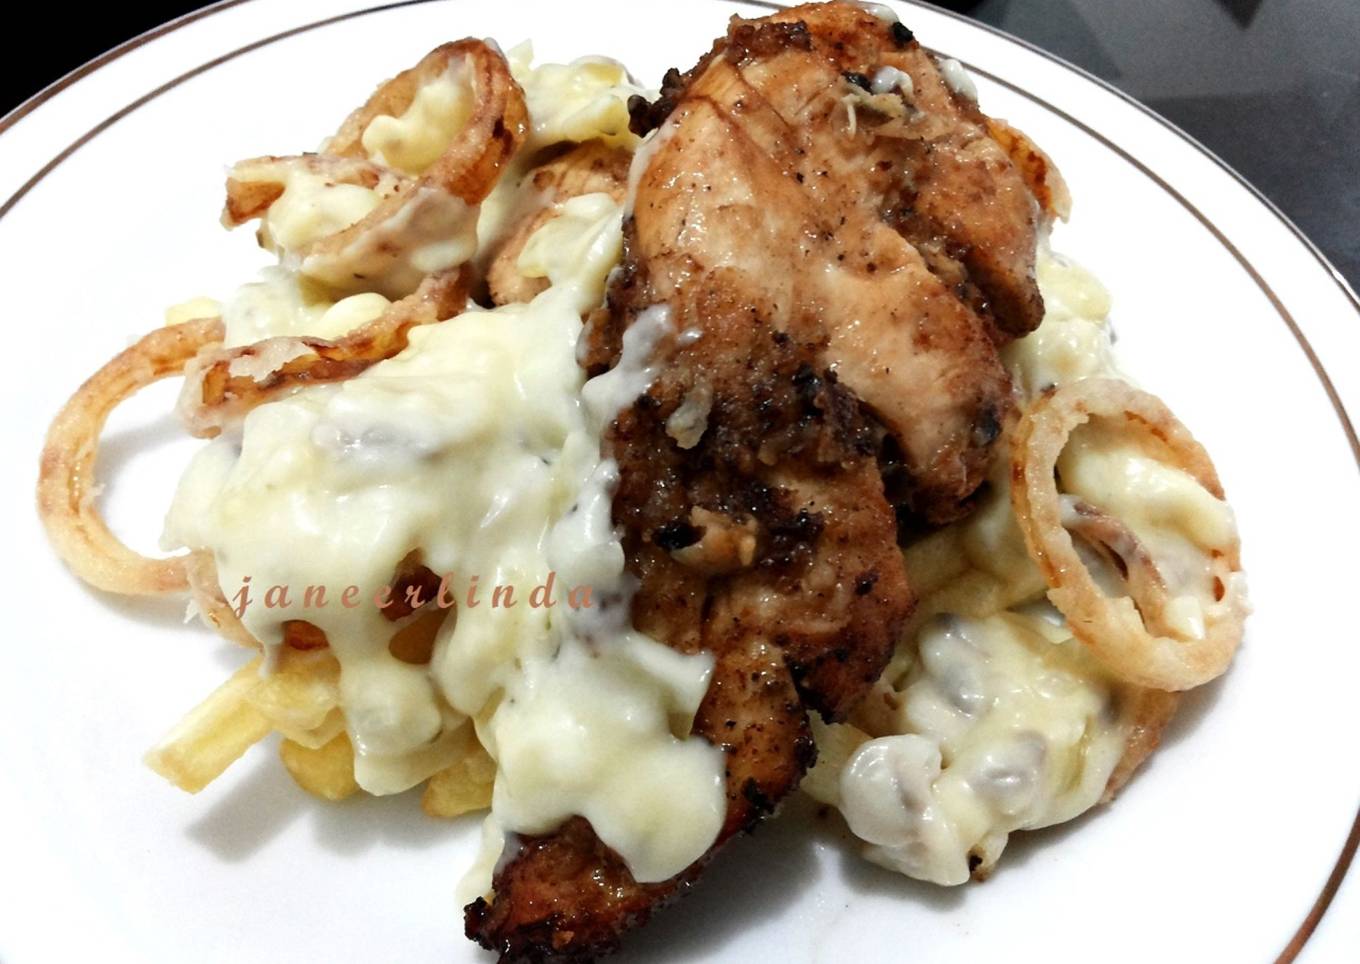 Grilled Chicken with Creamy Mushroom Sauce